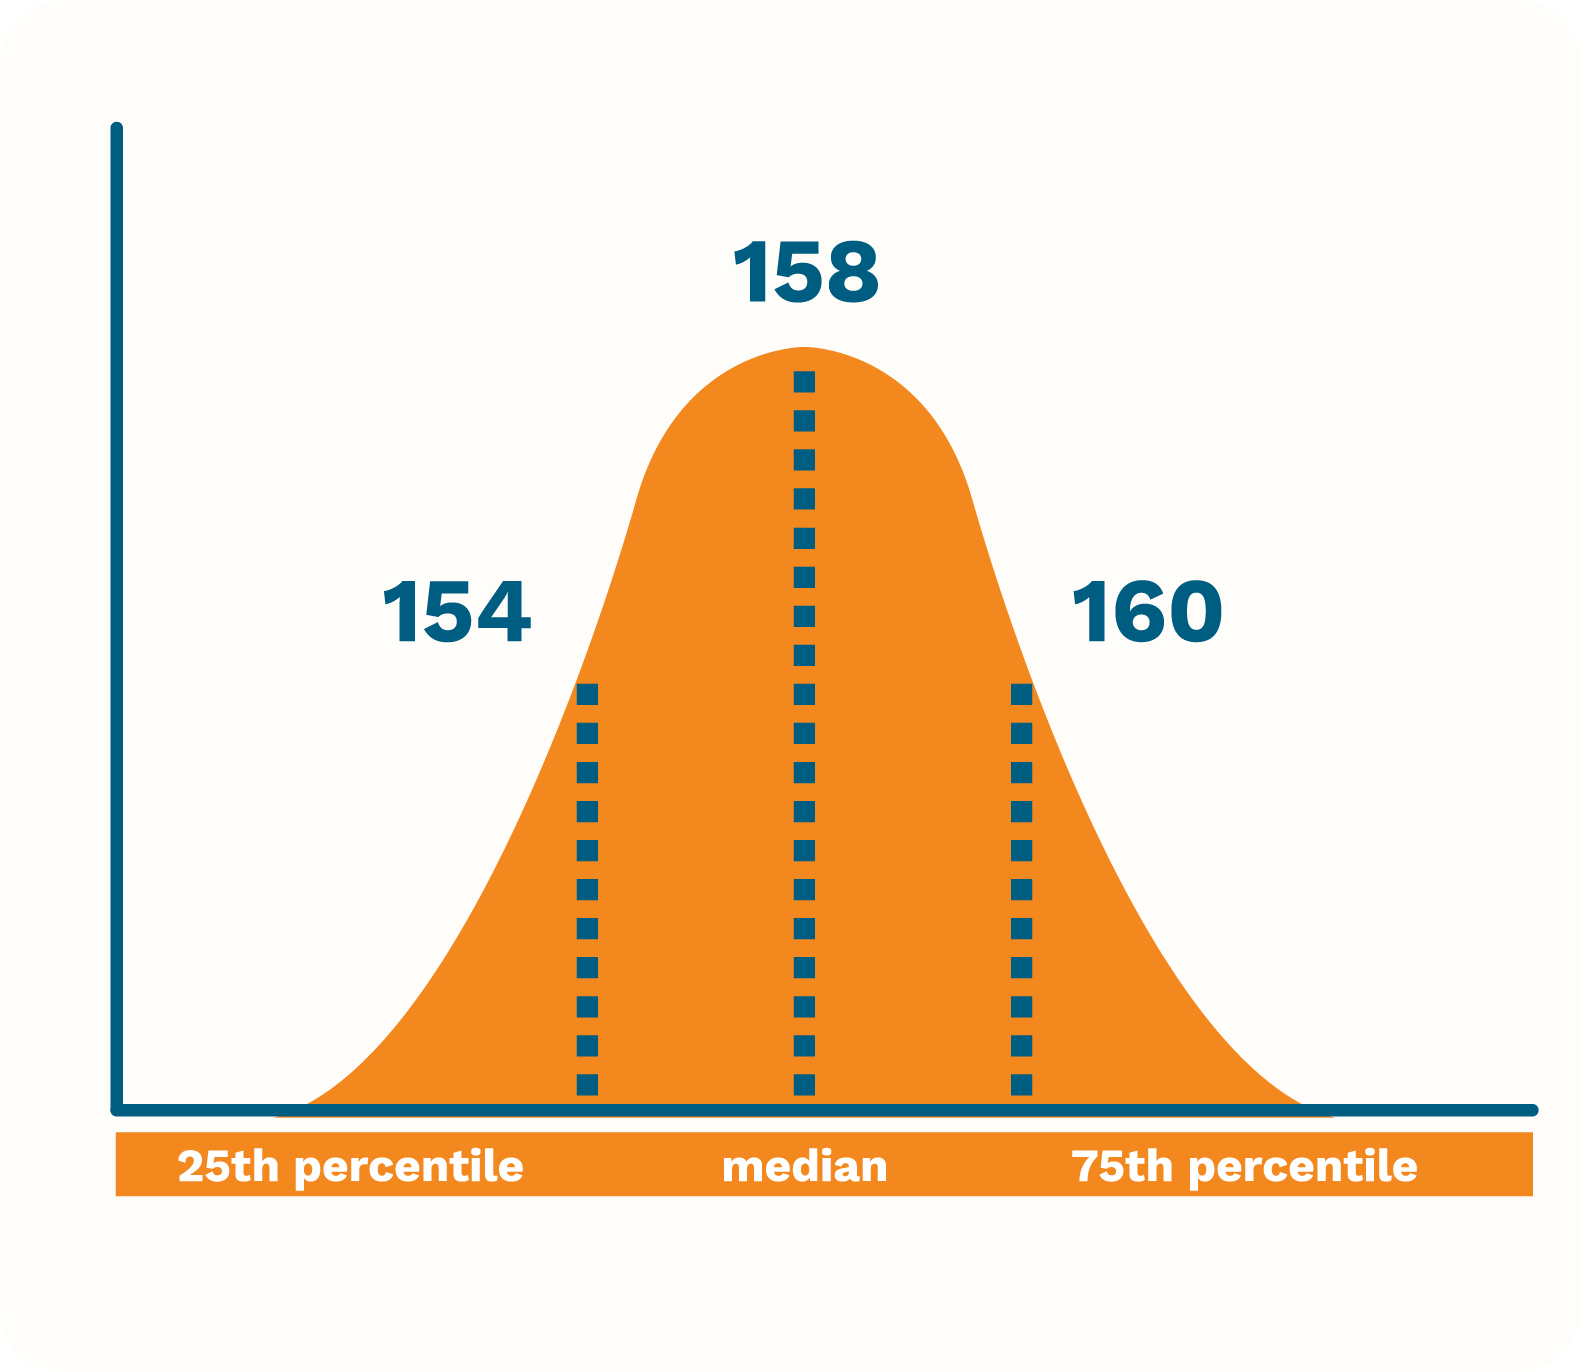 Graph showing a 25th percentile of 154, a median of 158, and a 75th percentile of 160